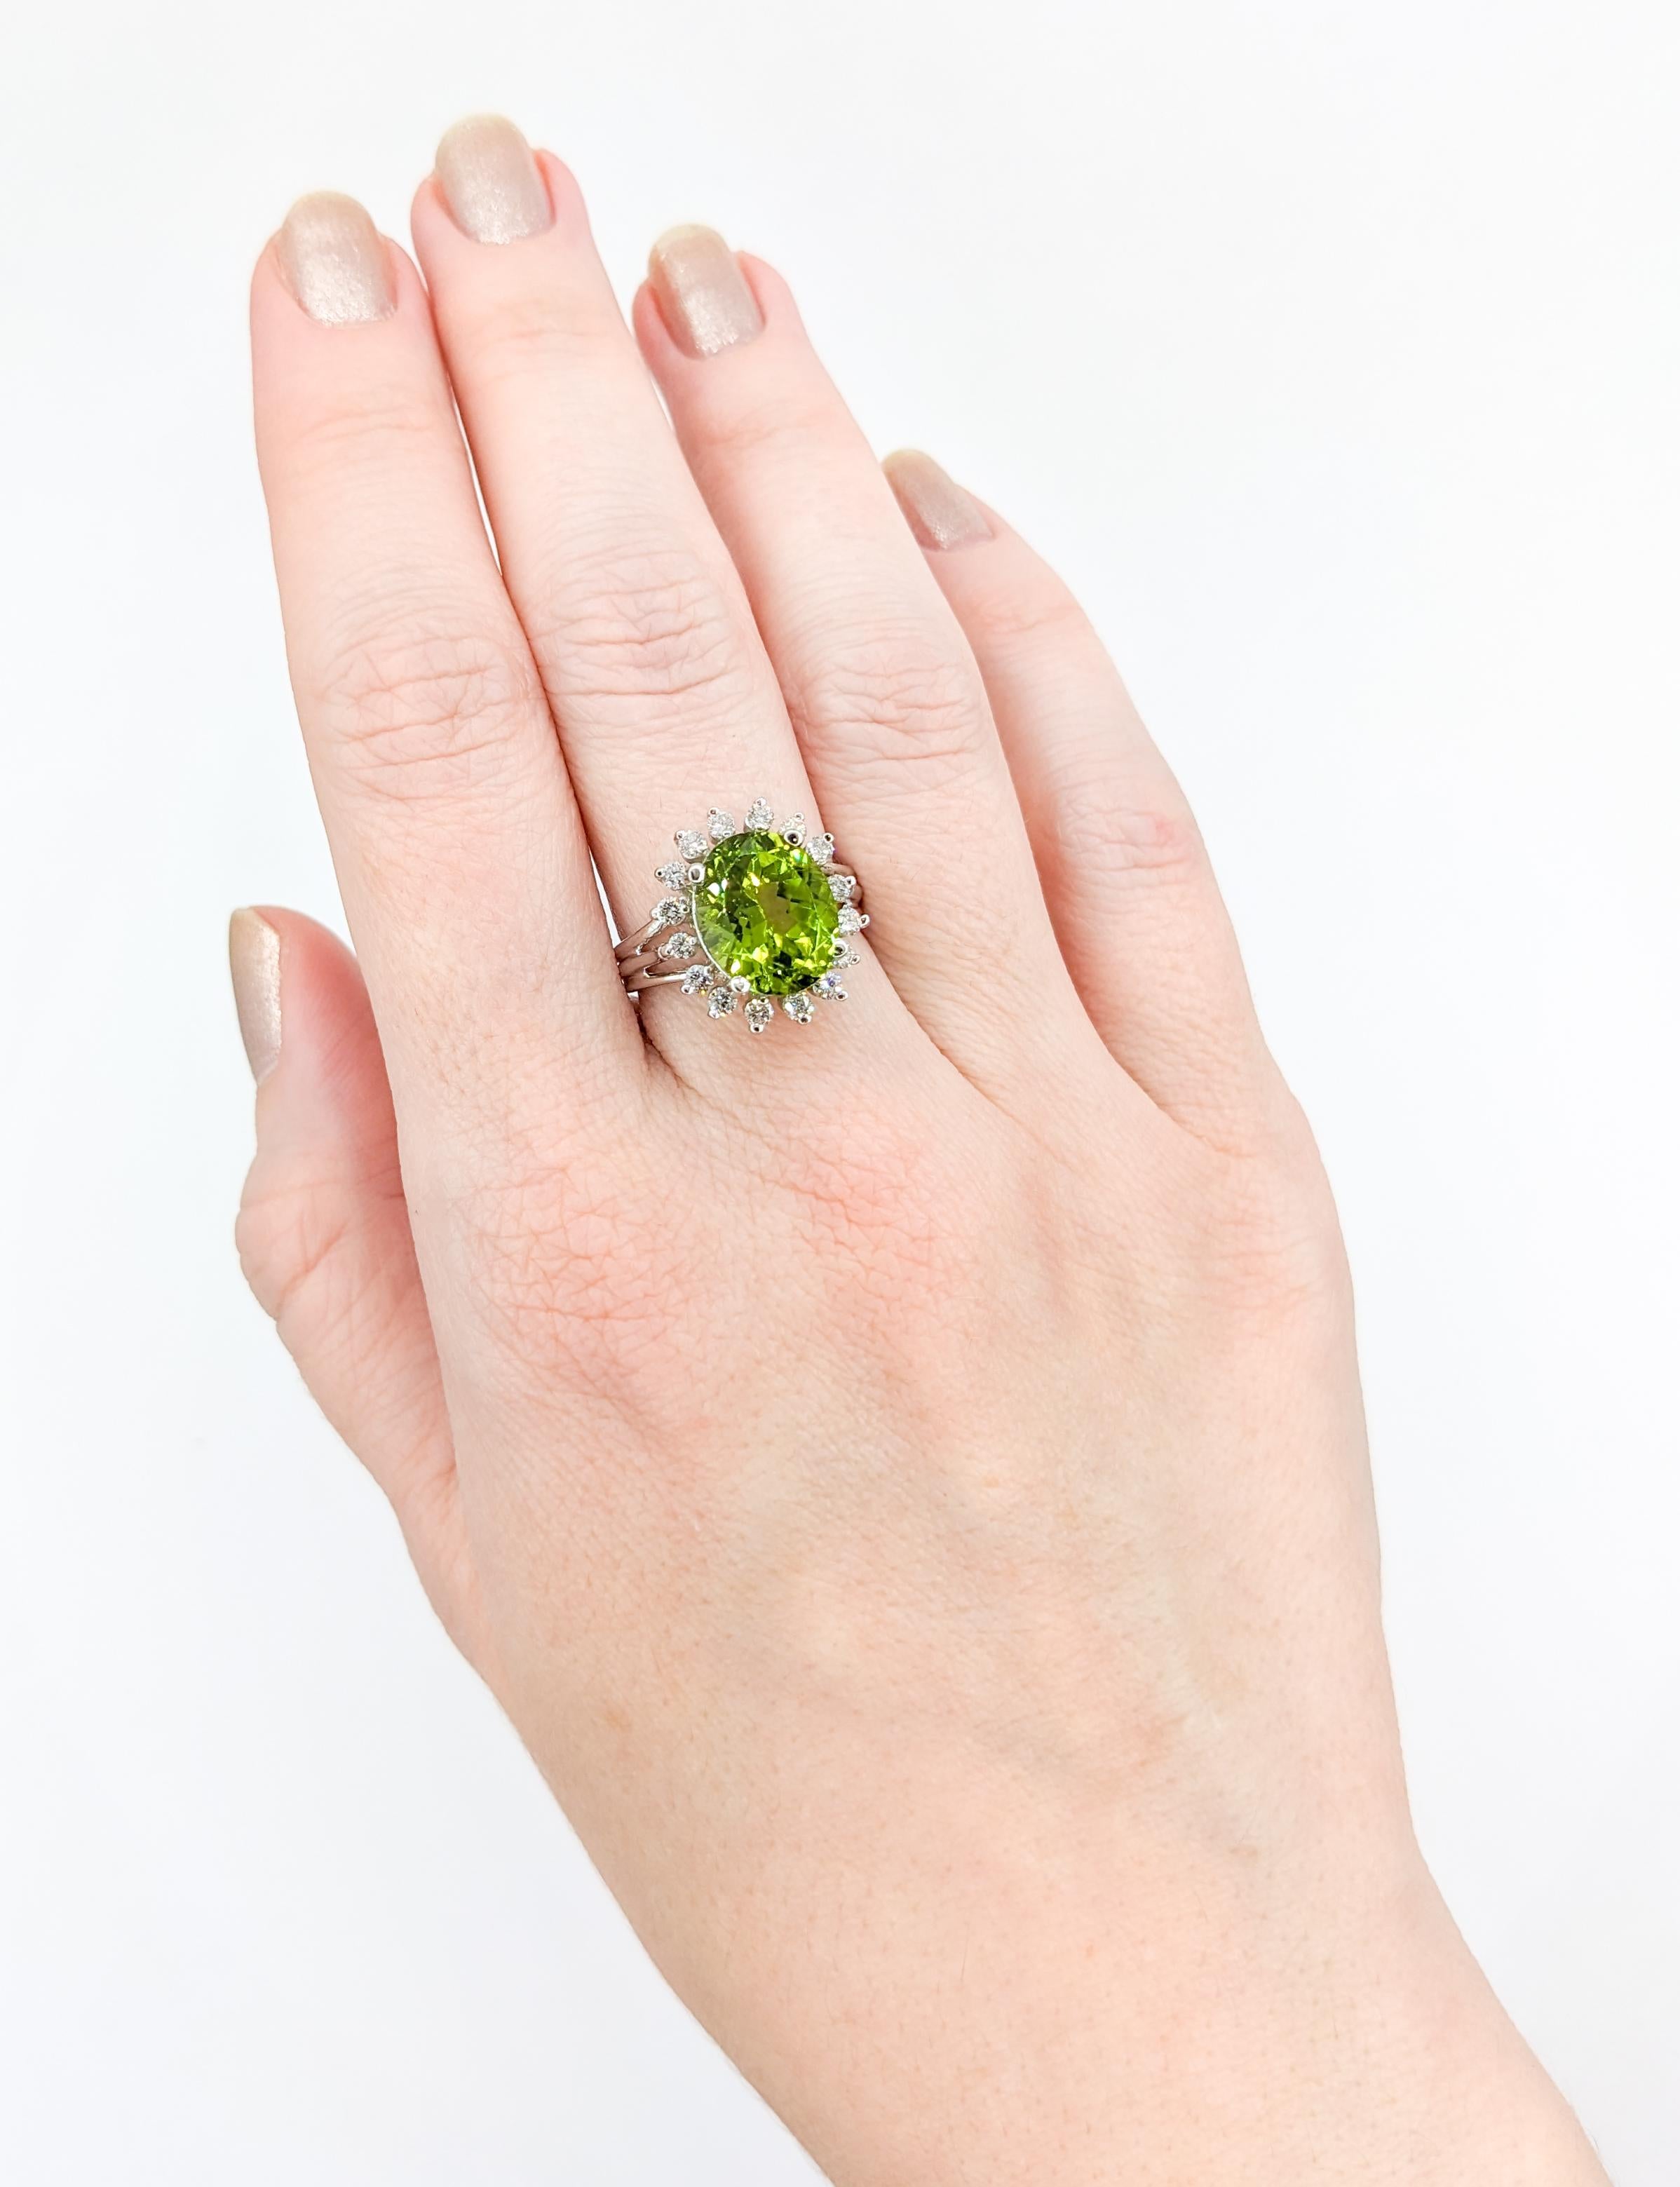 Green Apple 5ct Peridot & Diamond Halo Cocktail Ring

Discover our dazzling ring, a masterful creation meticulously fashioned from 14k white gold, offering a splendid juxtaposition of classic elegance and vibrant charm. Featuring .55ctw of round